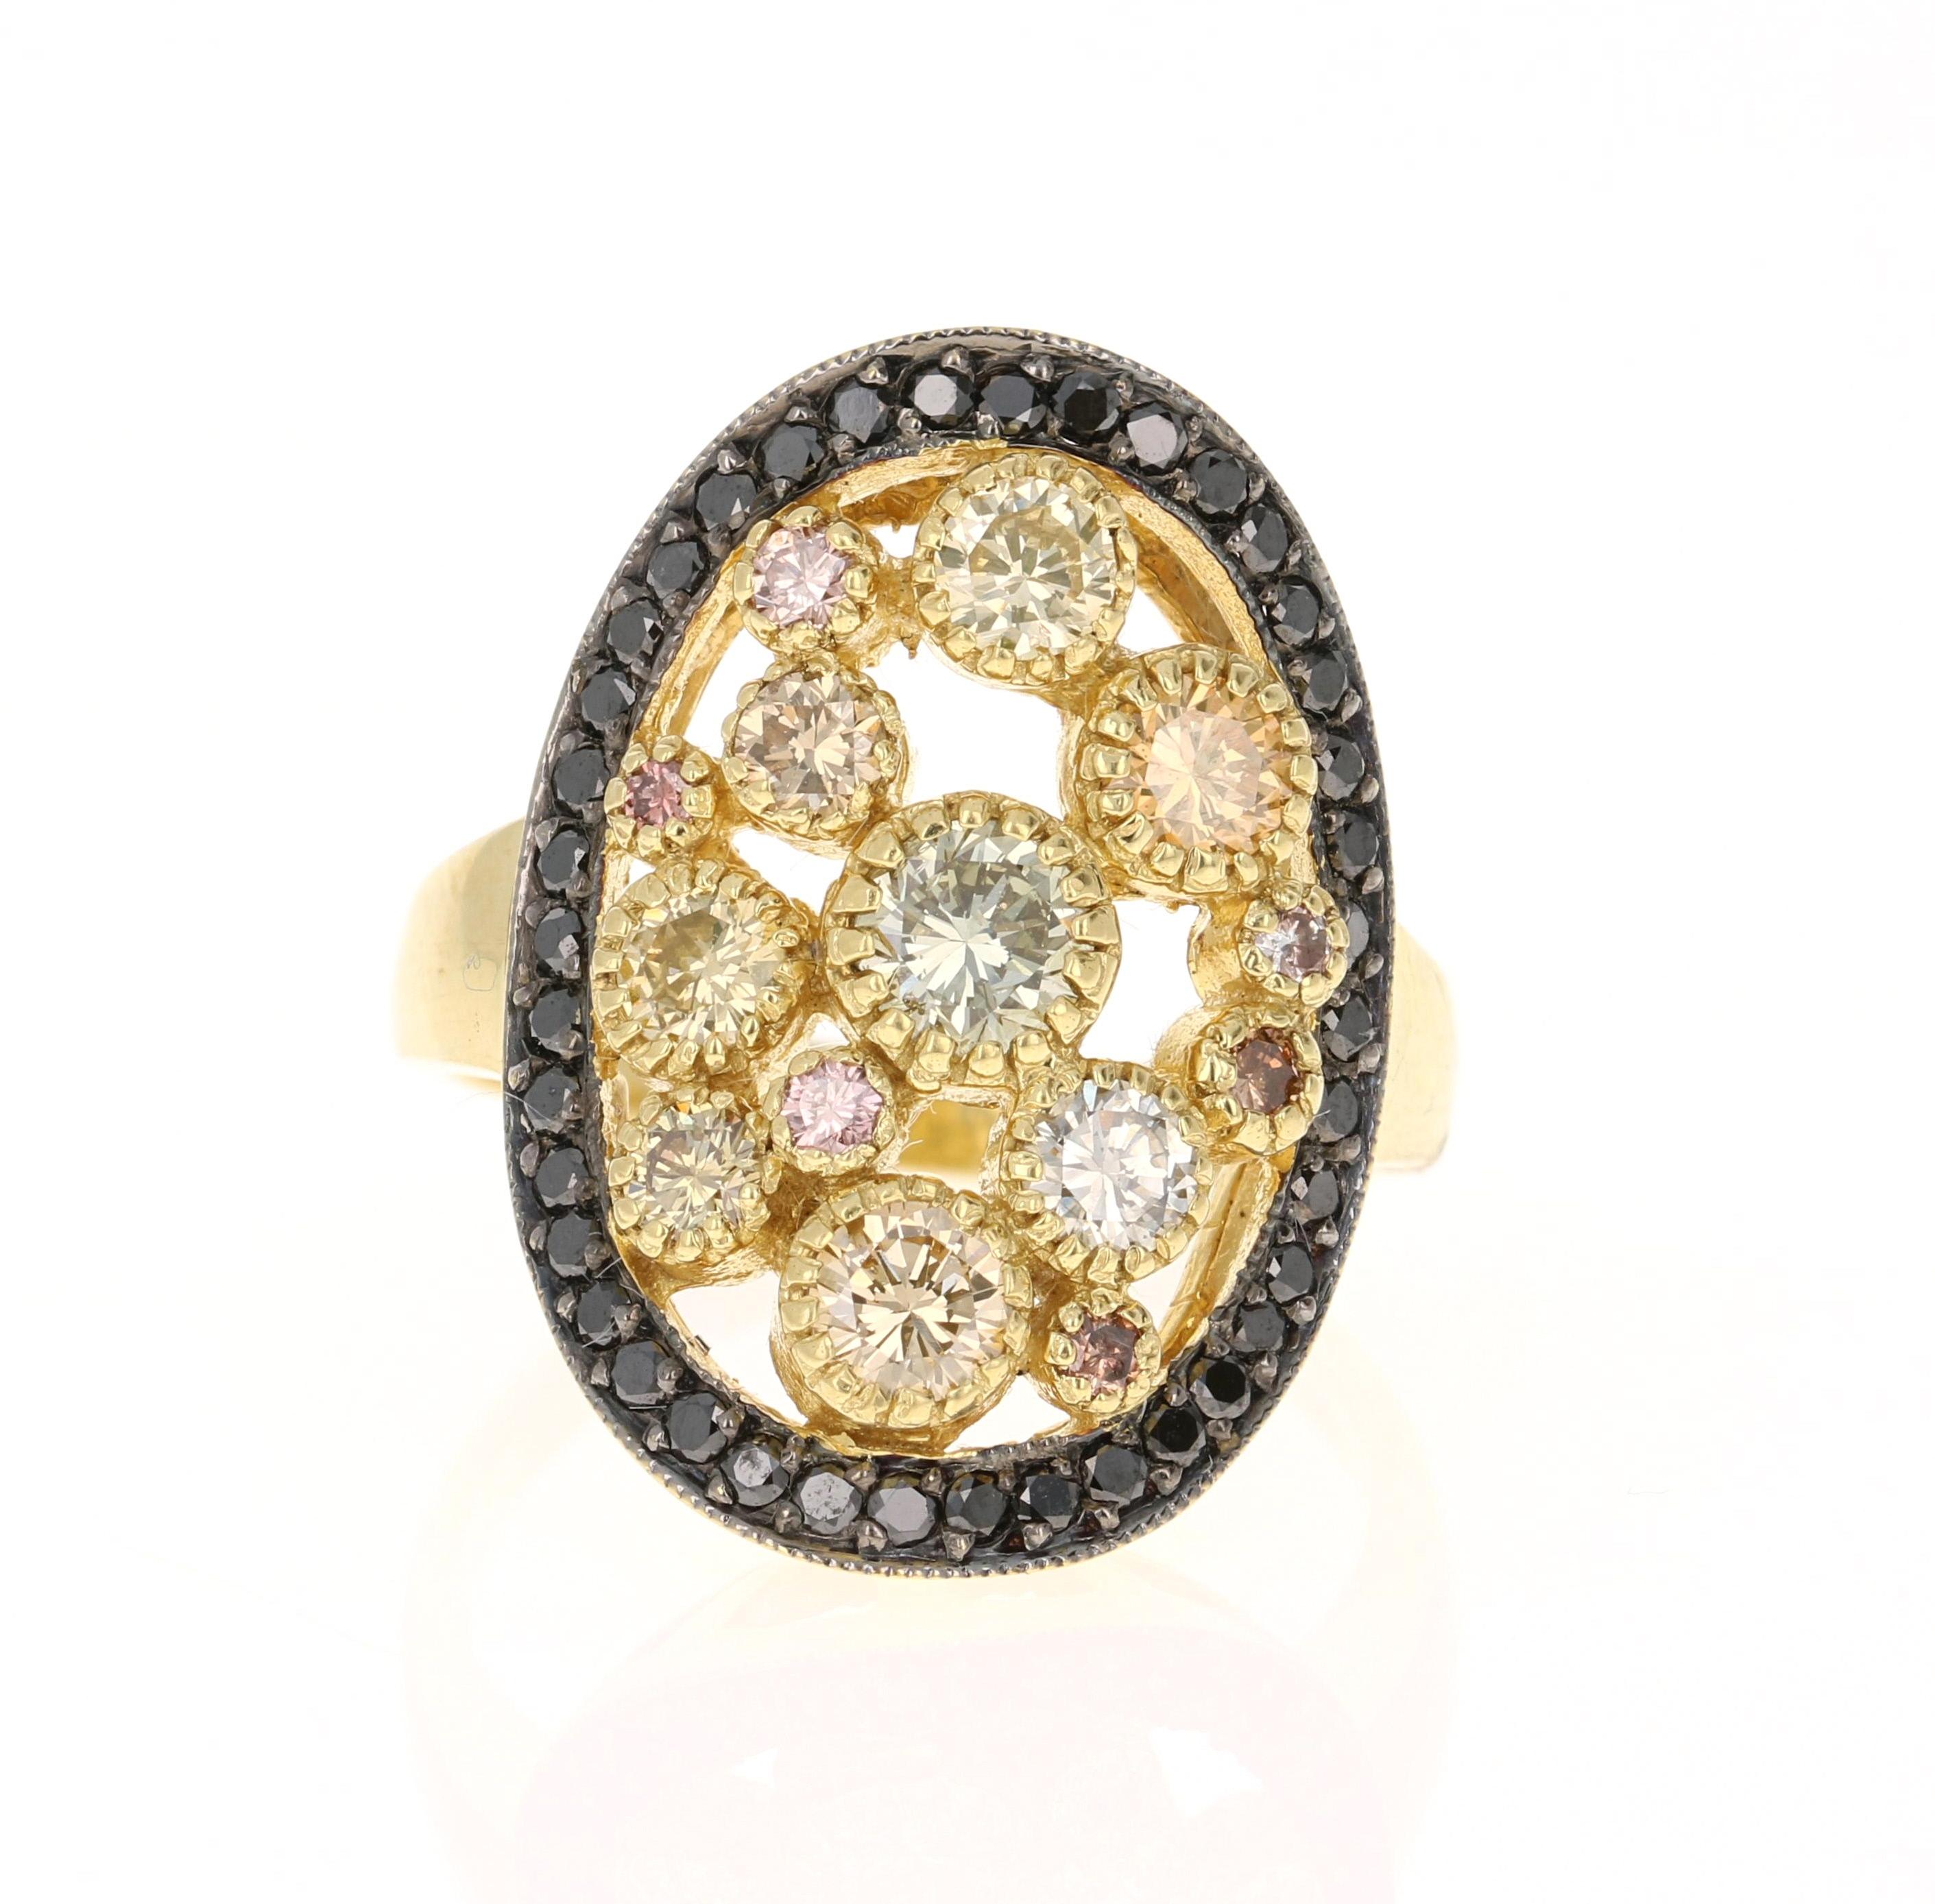 This magnificent beauty has 10 fancy color round cut natural diamonds that weigh 1.67 Carats It is further embellished with 40 Black Round Cut Diamonds that weigh 0.44 Carats. The total carat weight of the ring is 2.11 Carats. 

The ring is curated